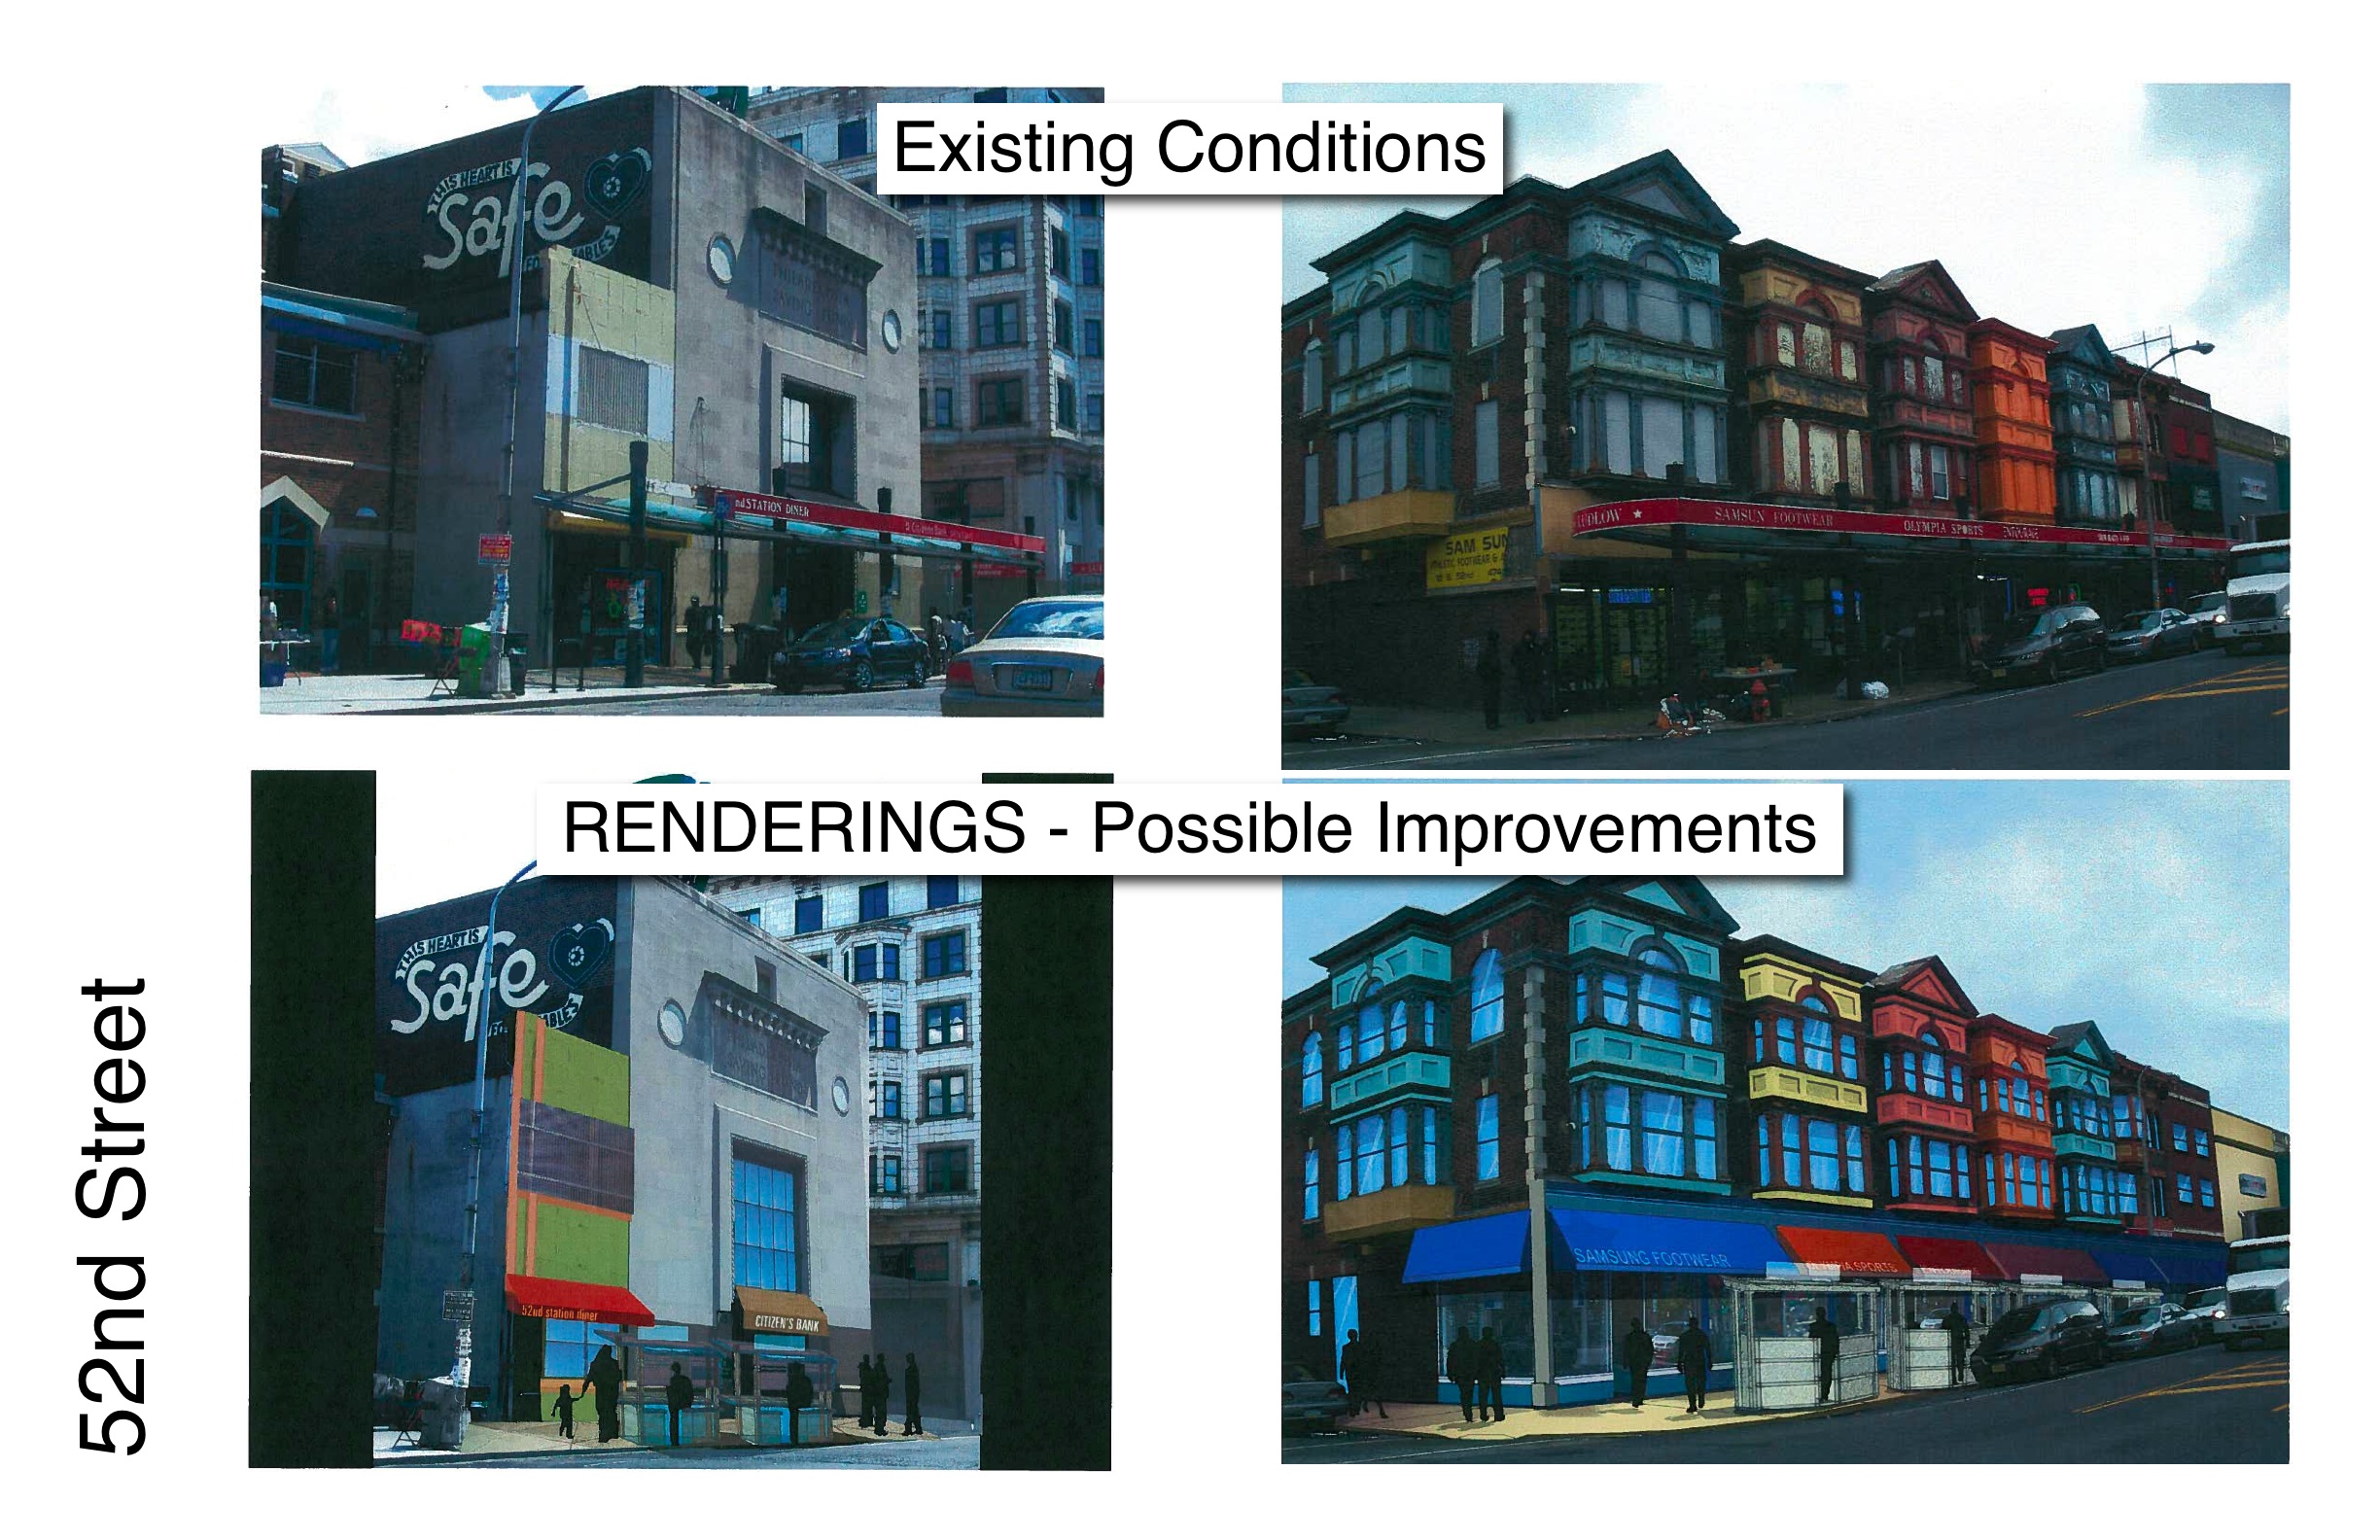 Series of before-after pictures from the Commerce Dept., showing how the corridor might look after the facade improvements